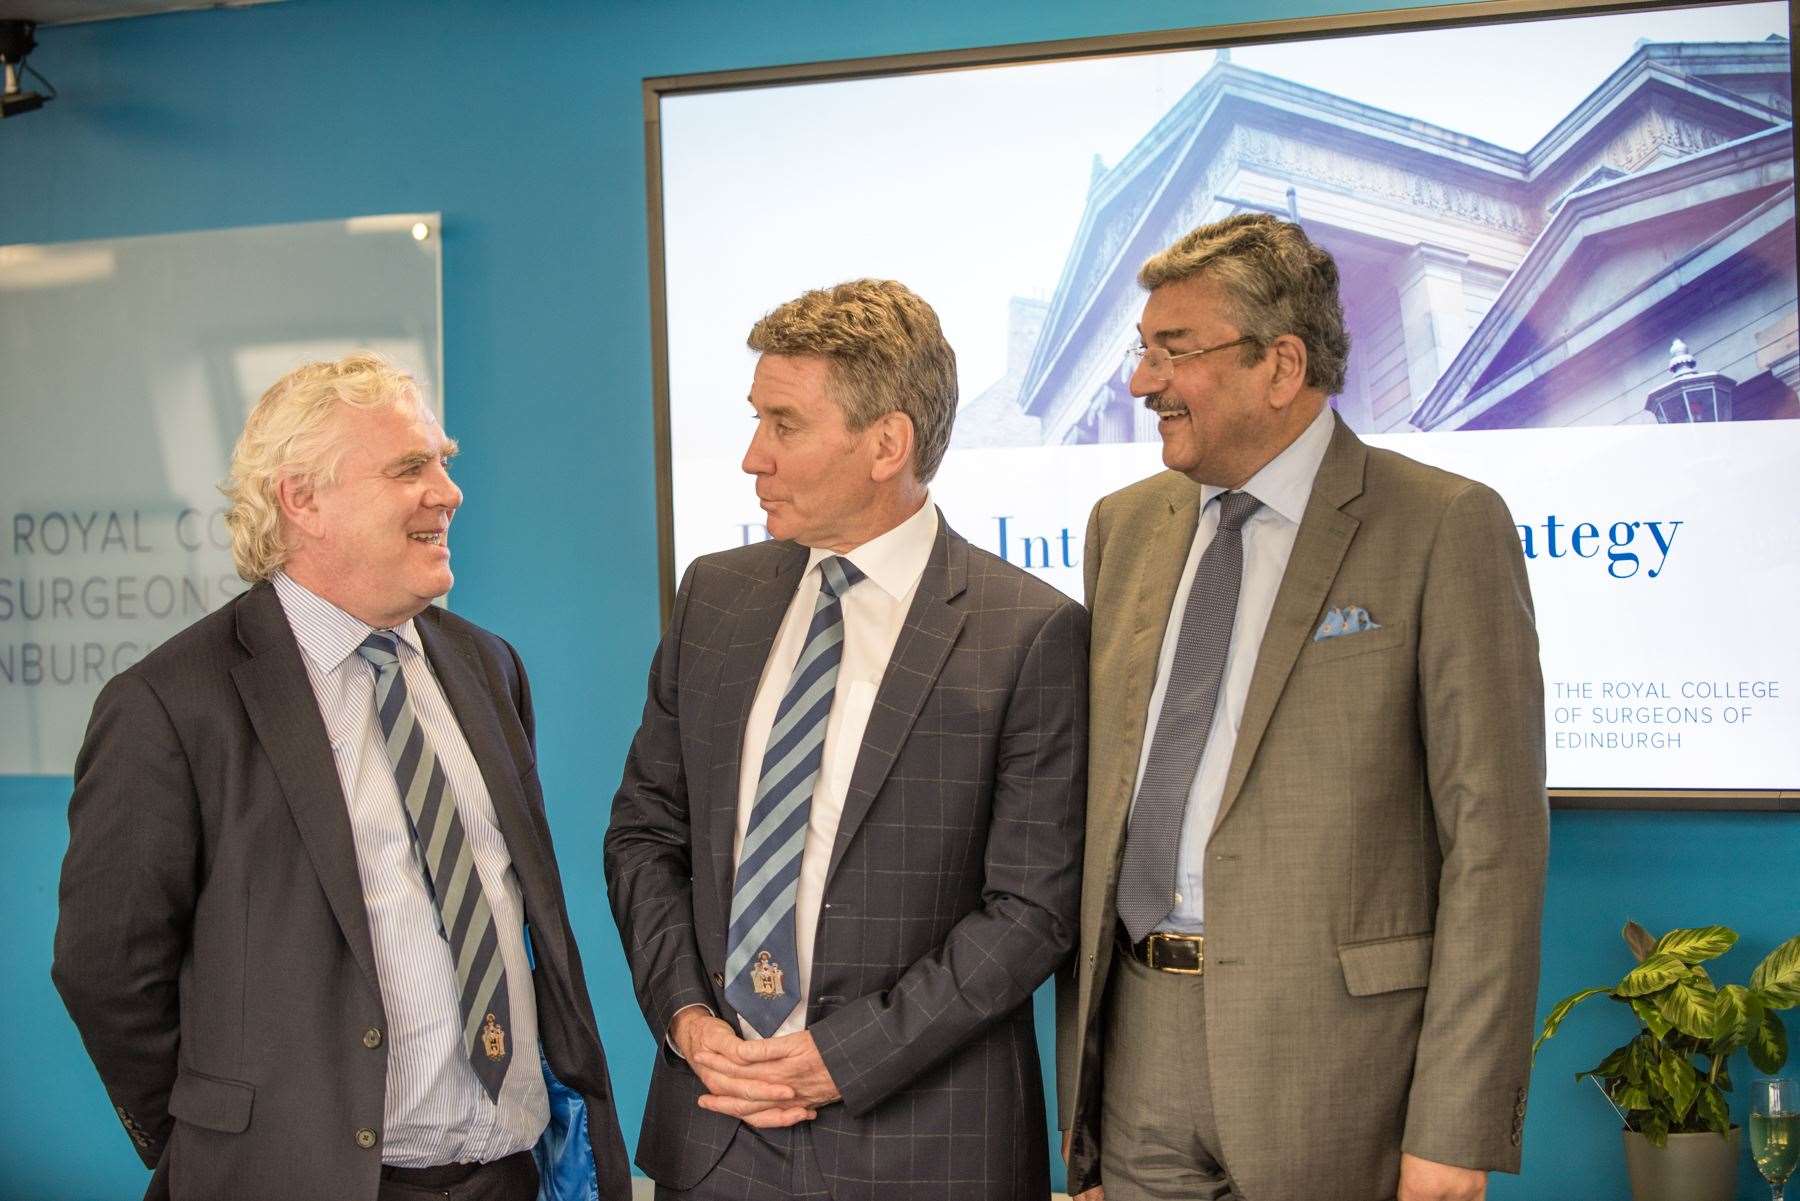 Pictured at the launch are (from left) Stuart Clark (IPD Dean), Mike Griffin (RCSEd President) and Pala Rajesh (RCSEd Vice-President).